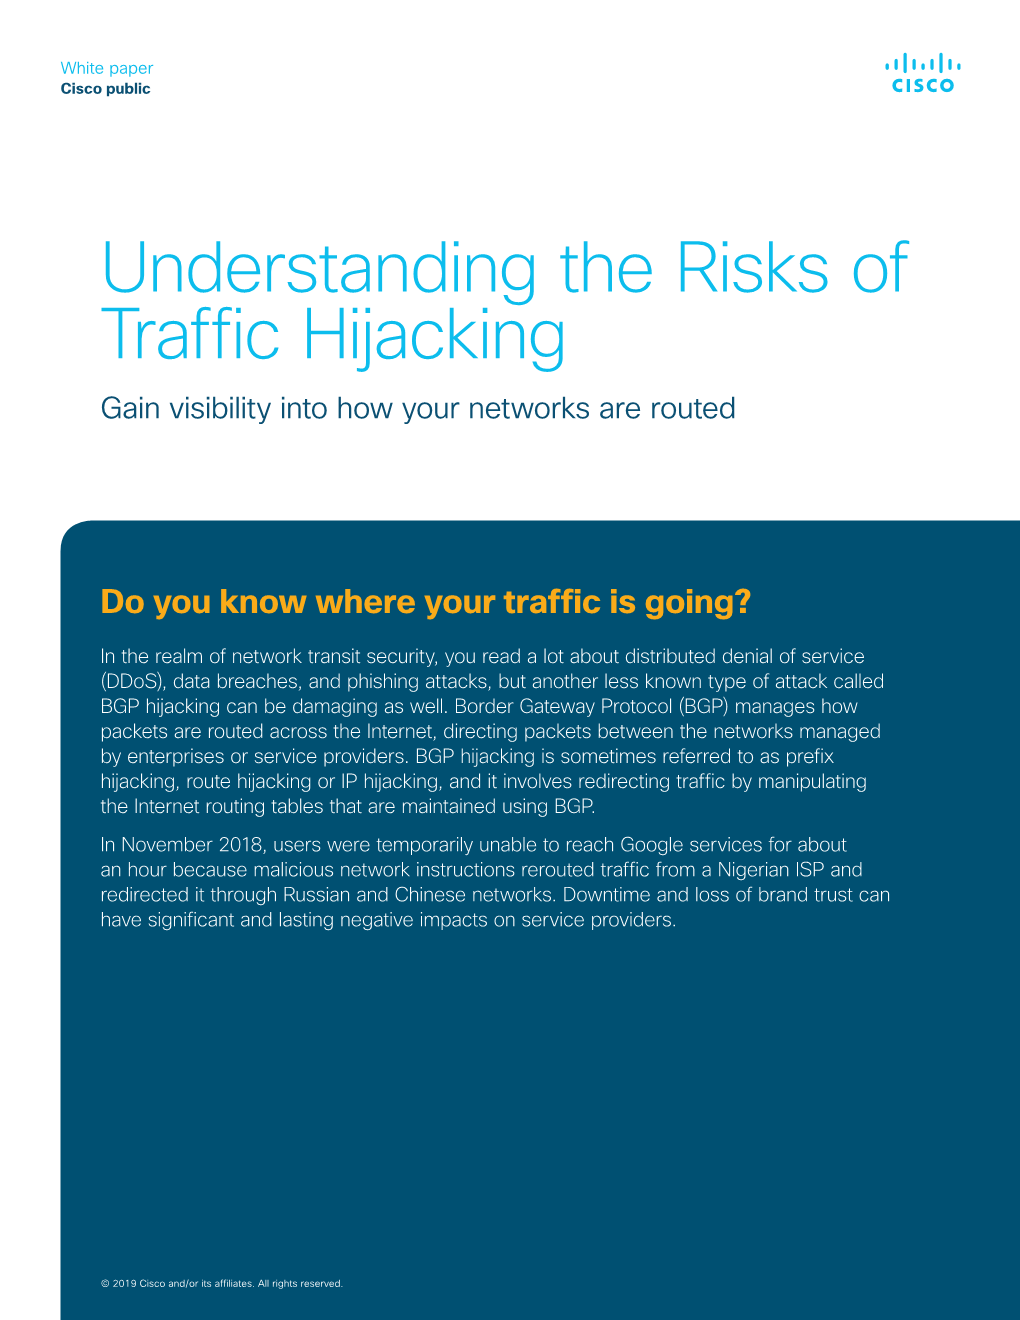 Understanding the Risks of Traffic Hijacking Gain Visibility Into How Your Networks Are Routed